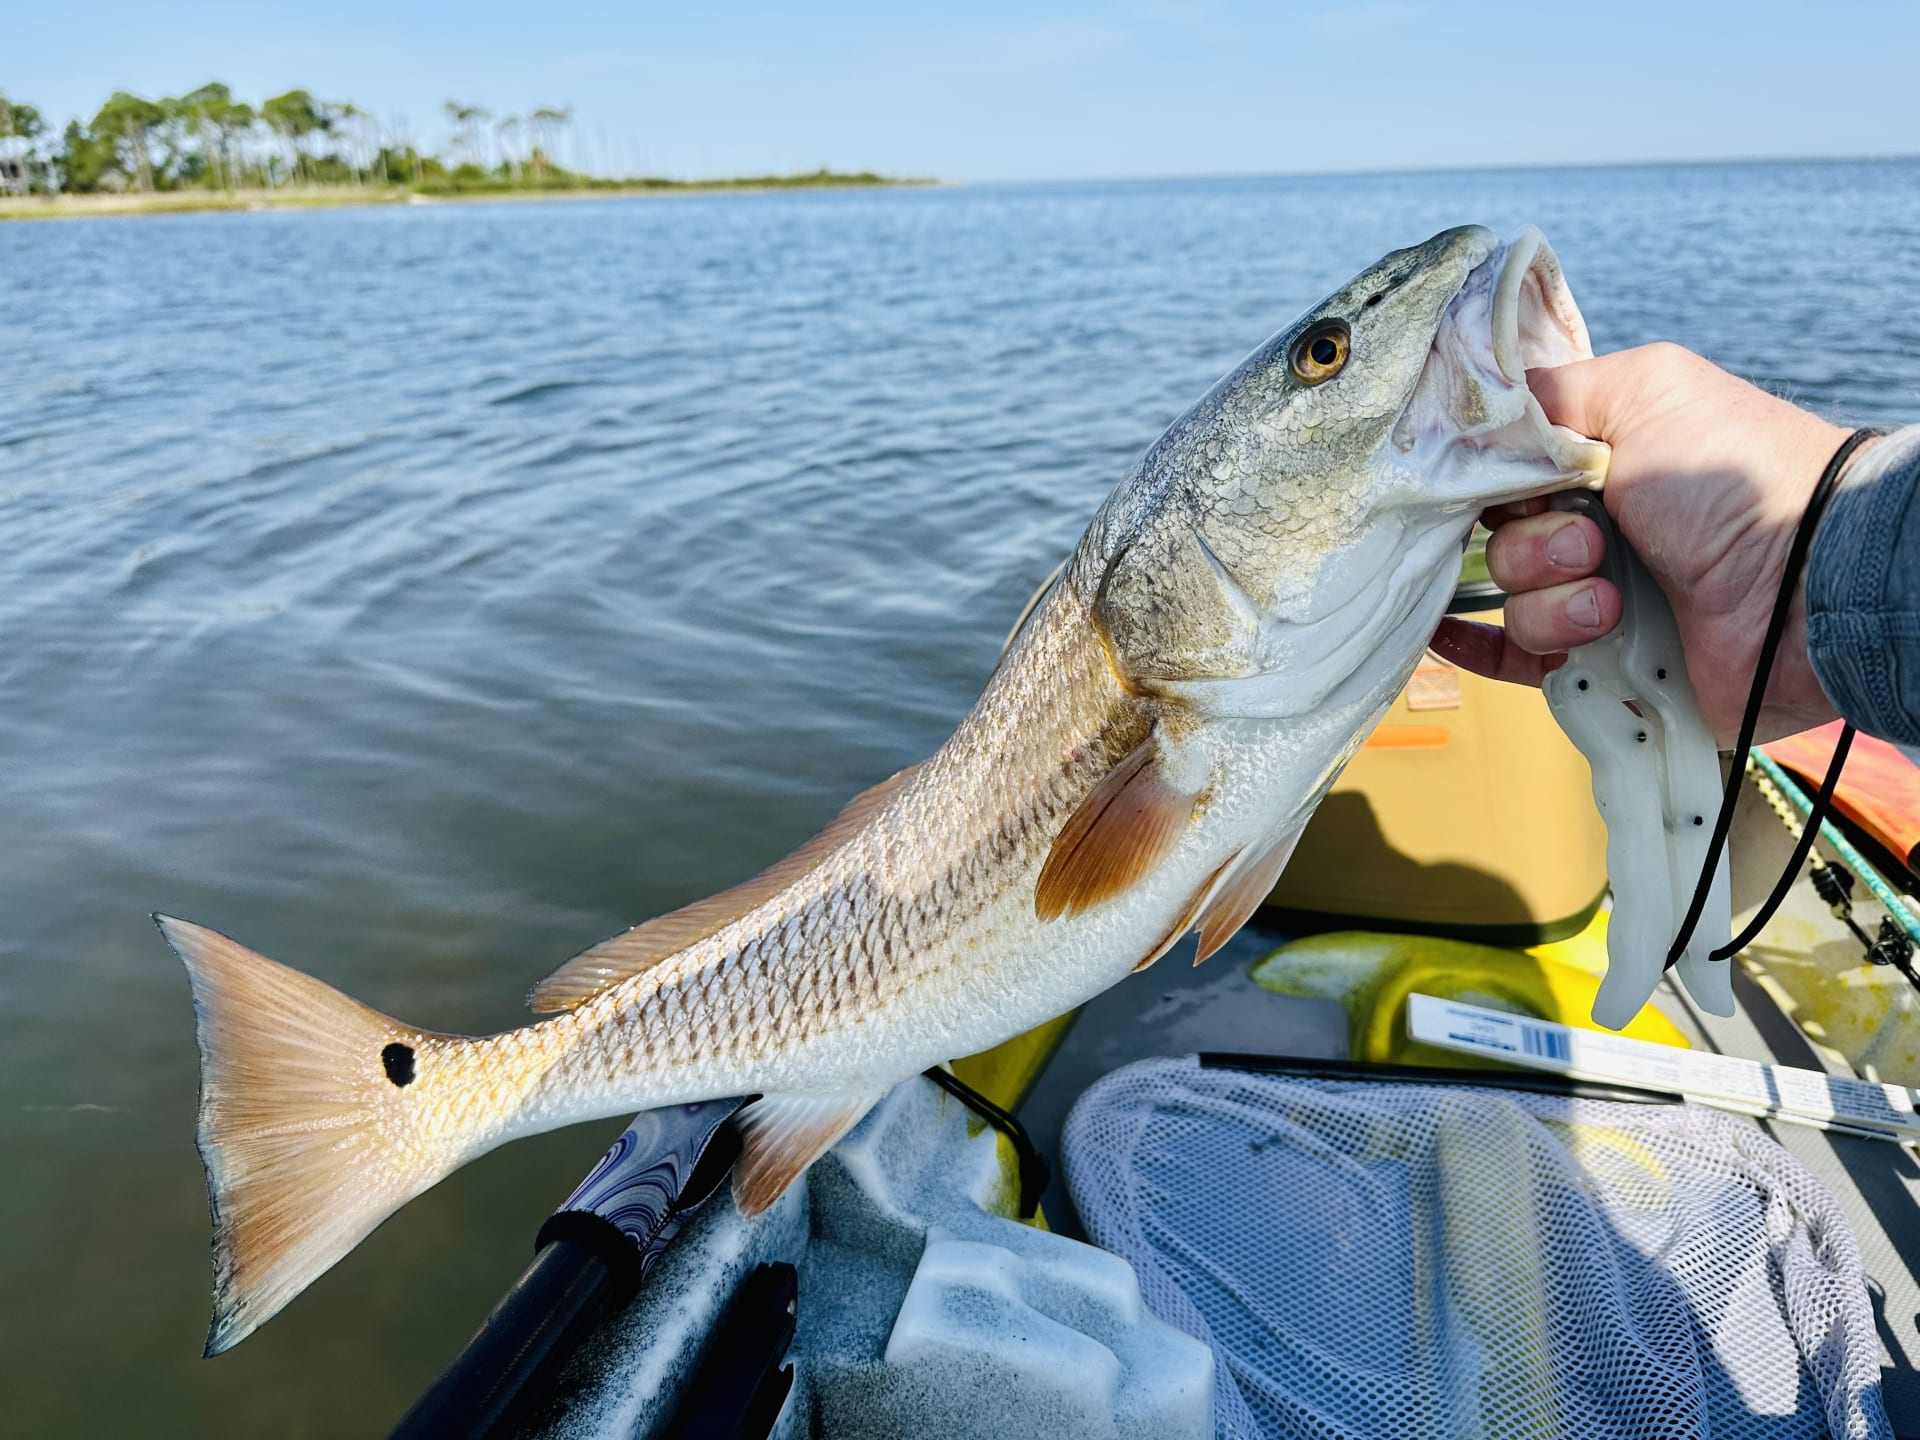 Discover the best campgrounds near Carrabelle, Florida with fishing